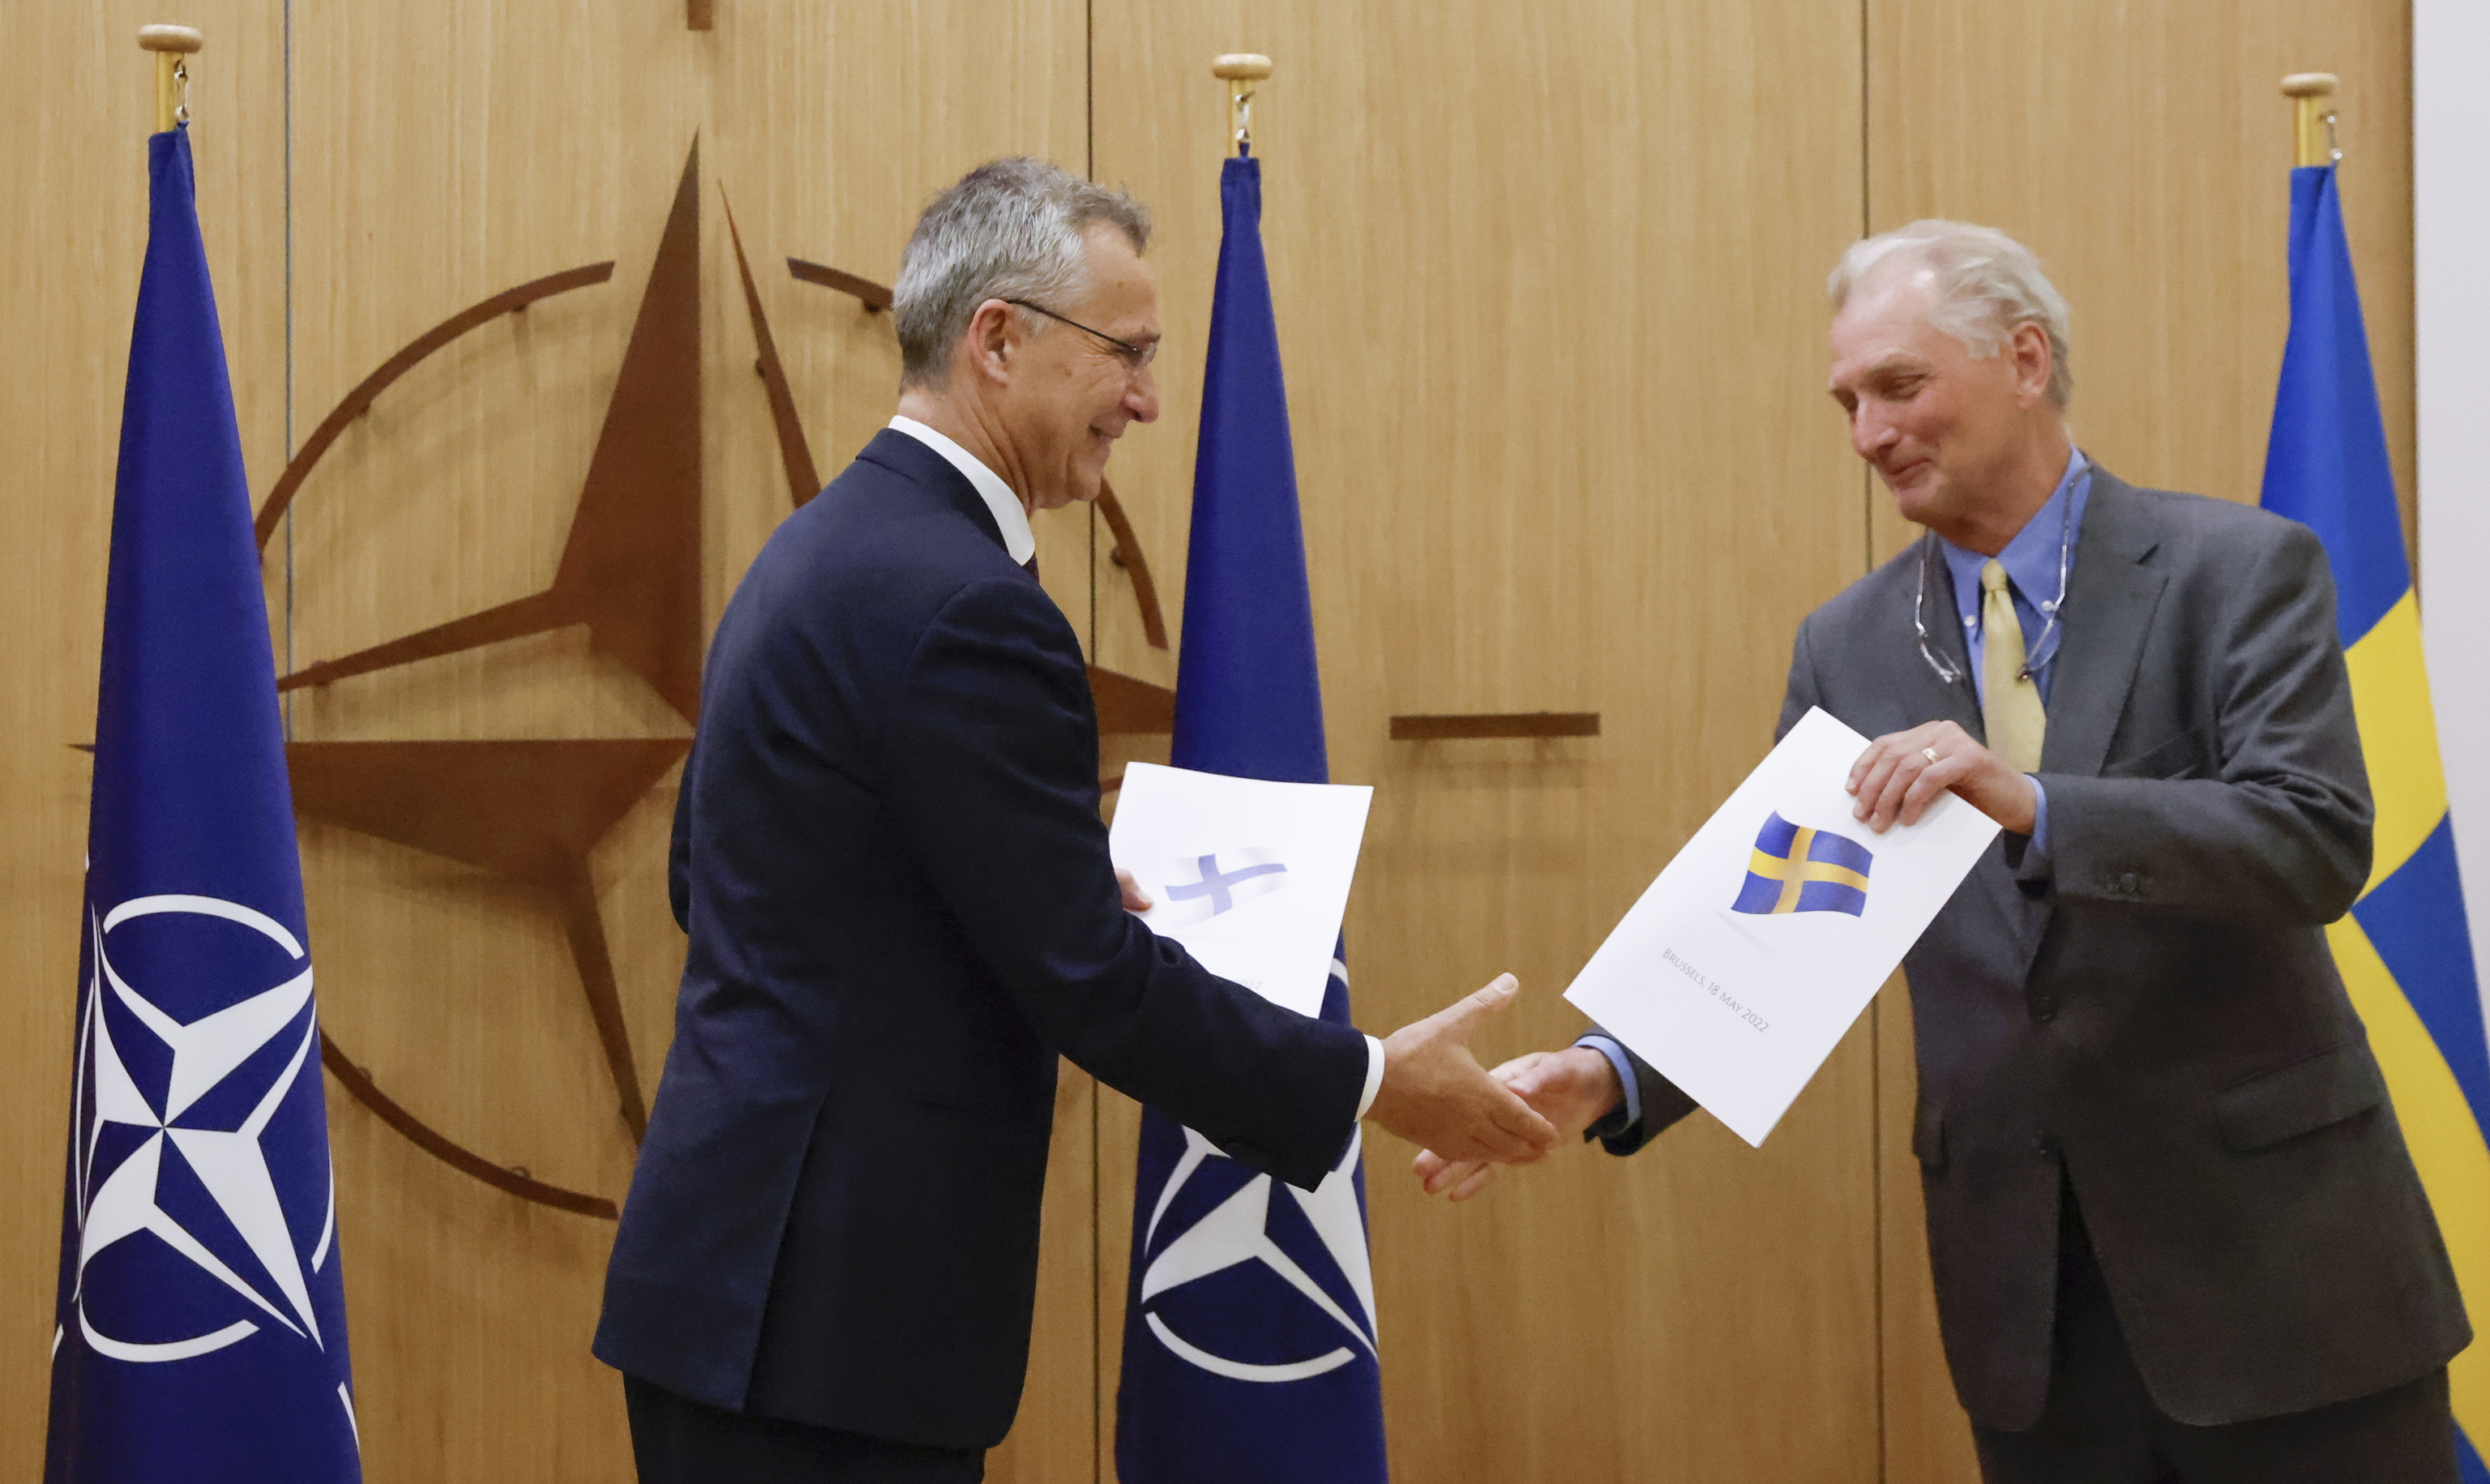 The Swedish ambassador delivers the NATO entry in Brussels.